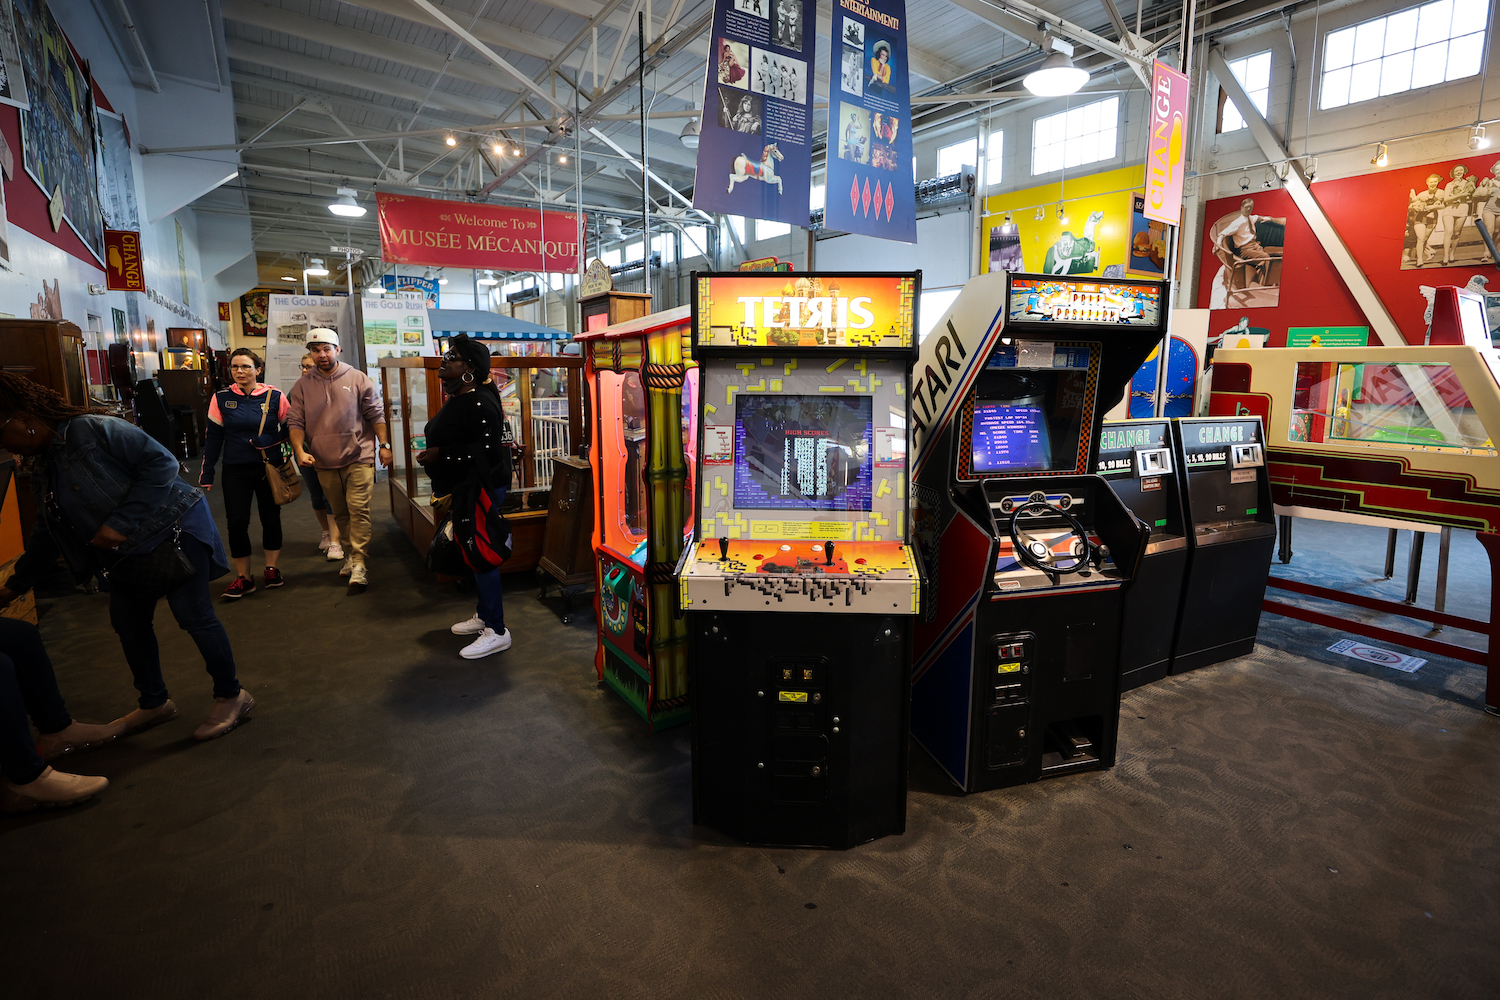 People enjoy in the Musee Mecanique, an antique coin operated arcade at Fisherman's Wharf in San Francisco, California